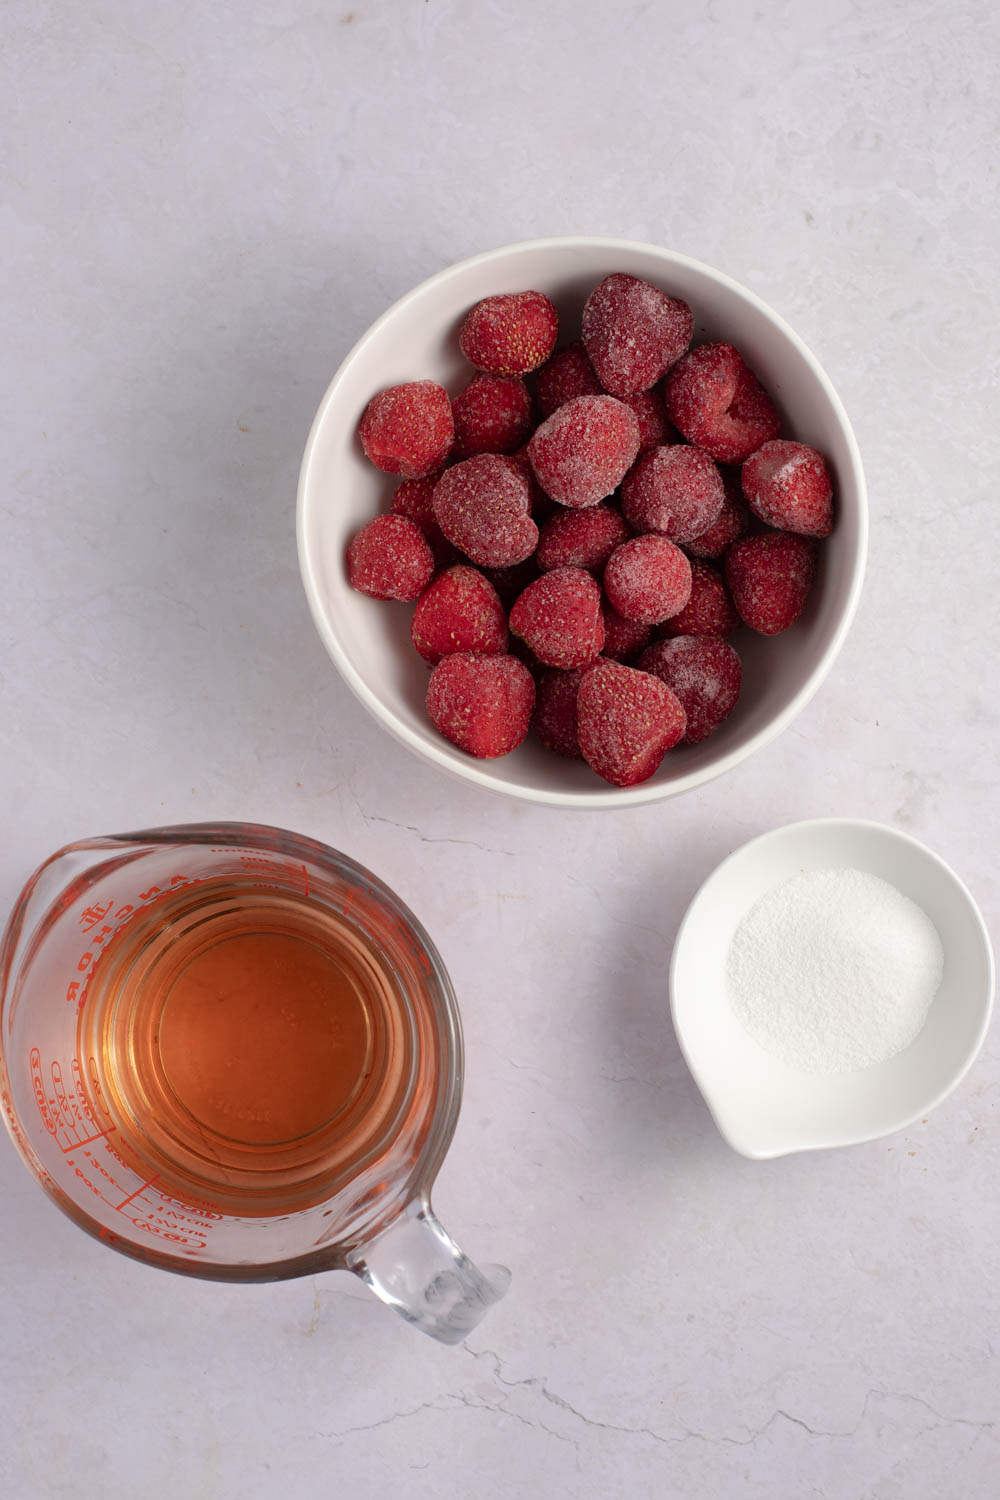 Frose Ingredients - Rose Wine, Frozen Strawberries, Sugar and Ice